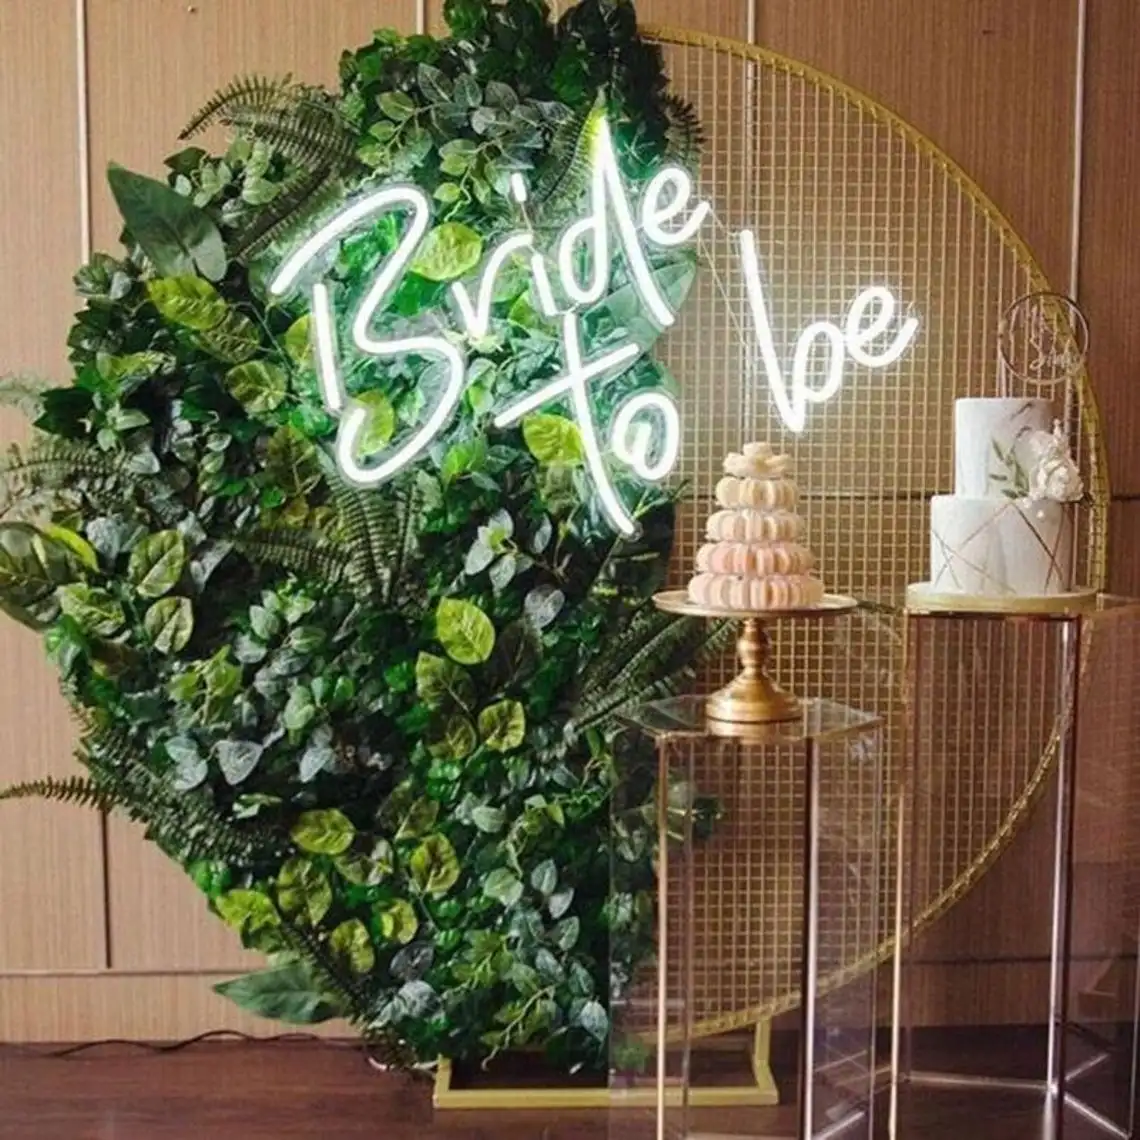 Bride to be Neon Lights Sign Wall Party Wedding Shop Party Birthday Event Decoration Wedding Gift Wedding Sign